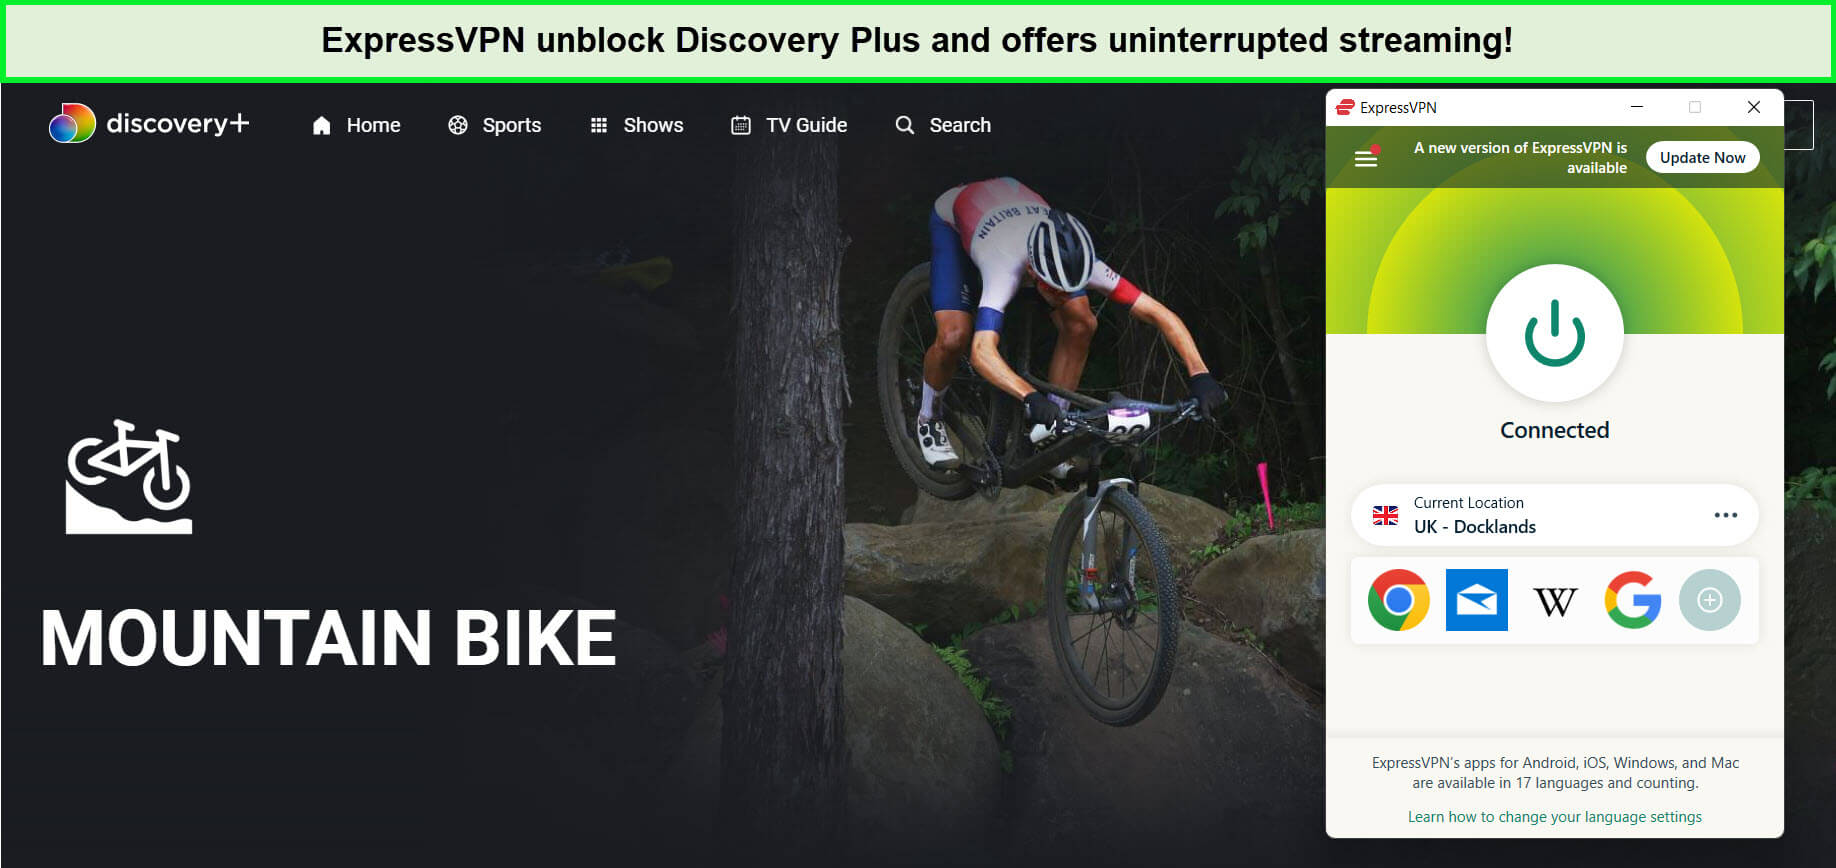 expressvpn-unblocks-uci-mountain-bike-world-series-in-Germany-discovery-plus